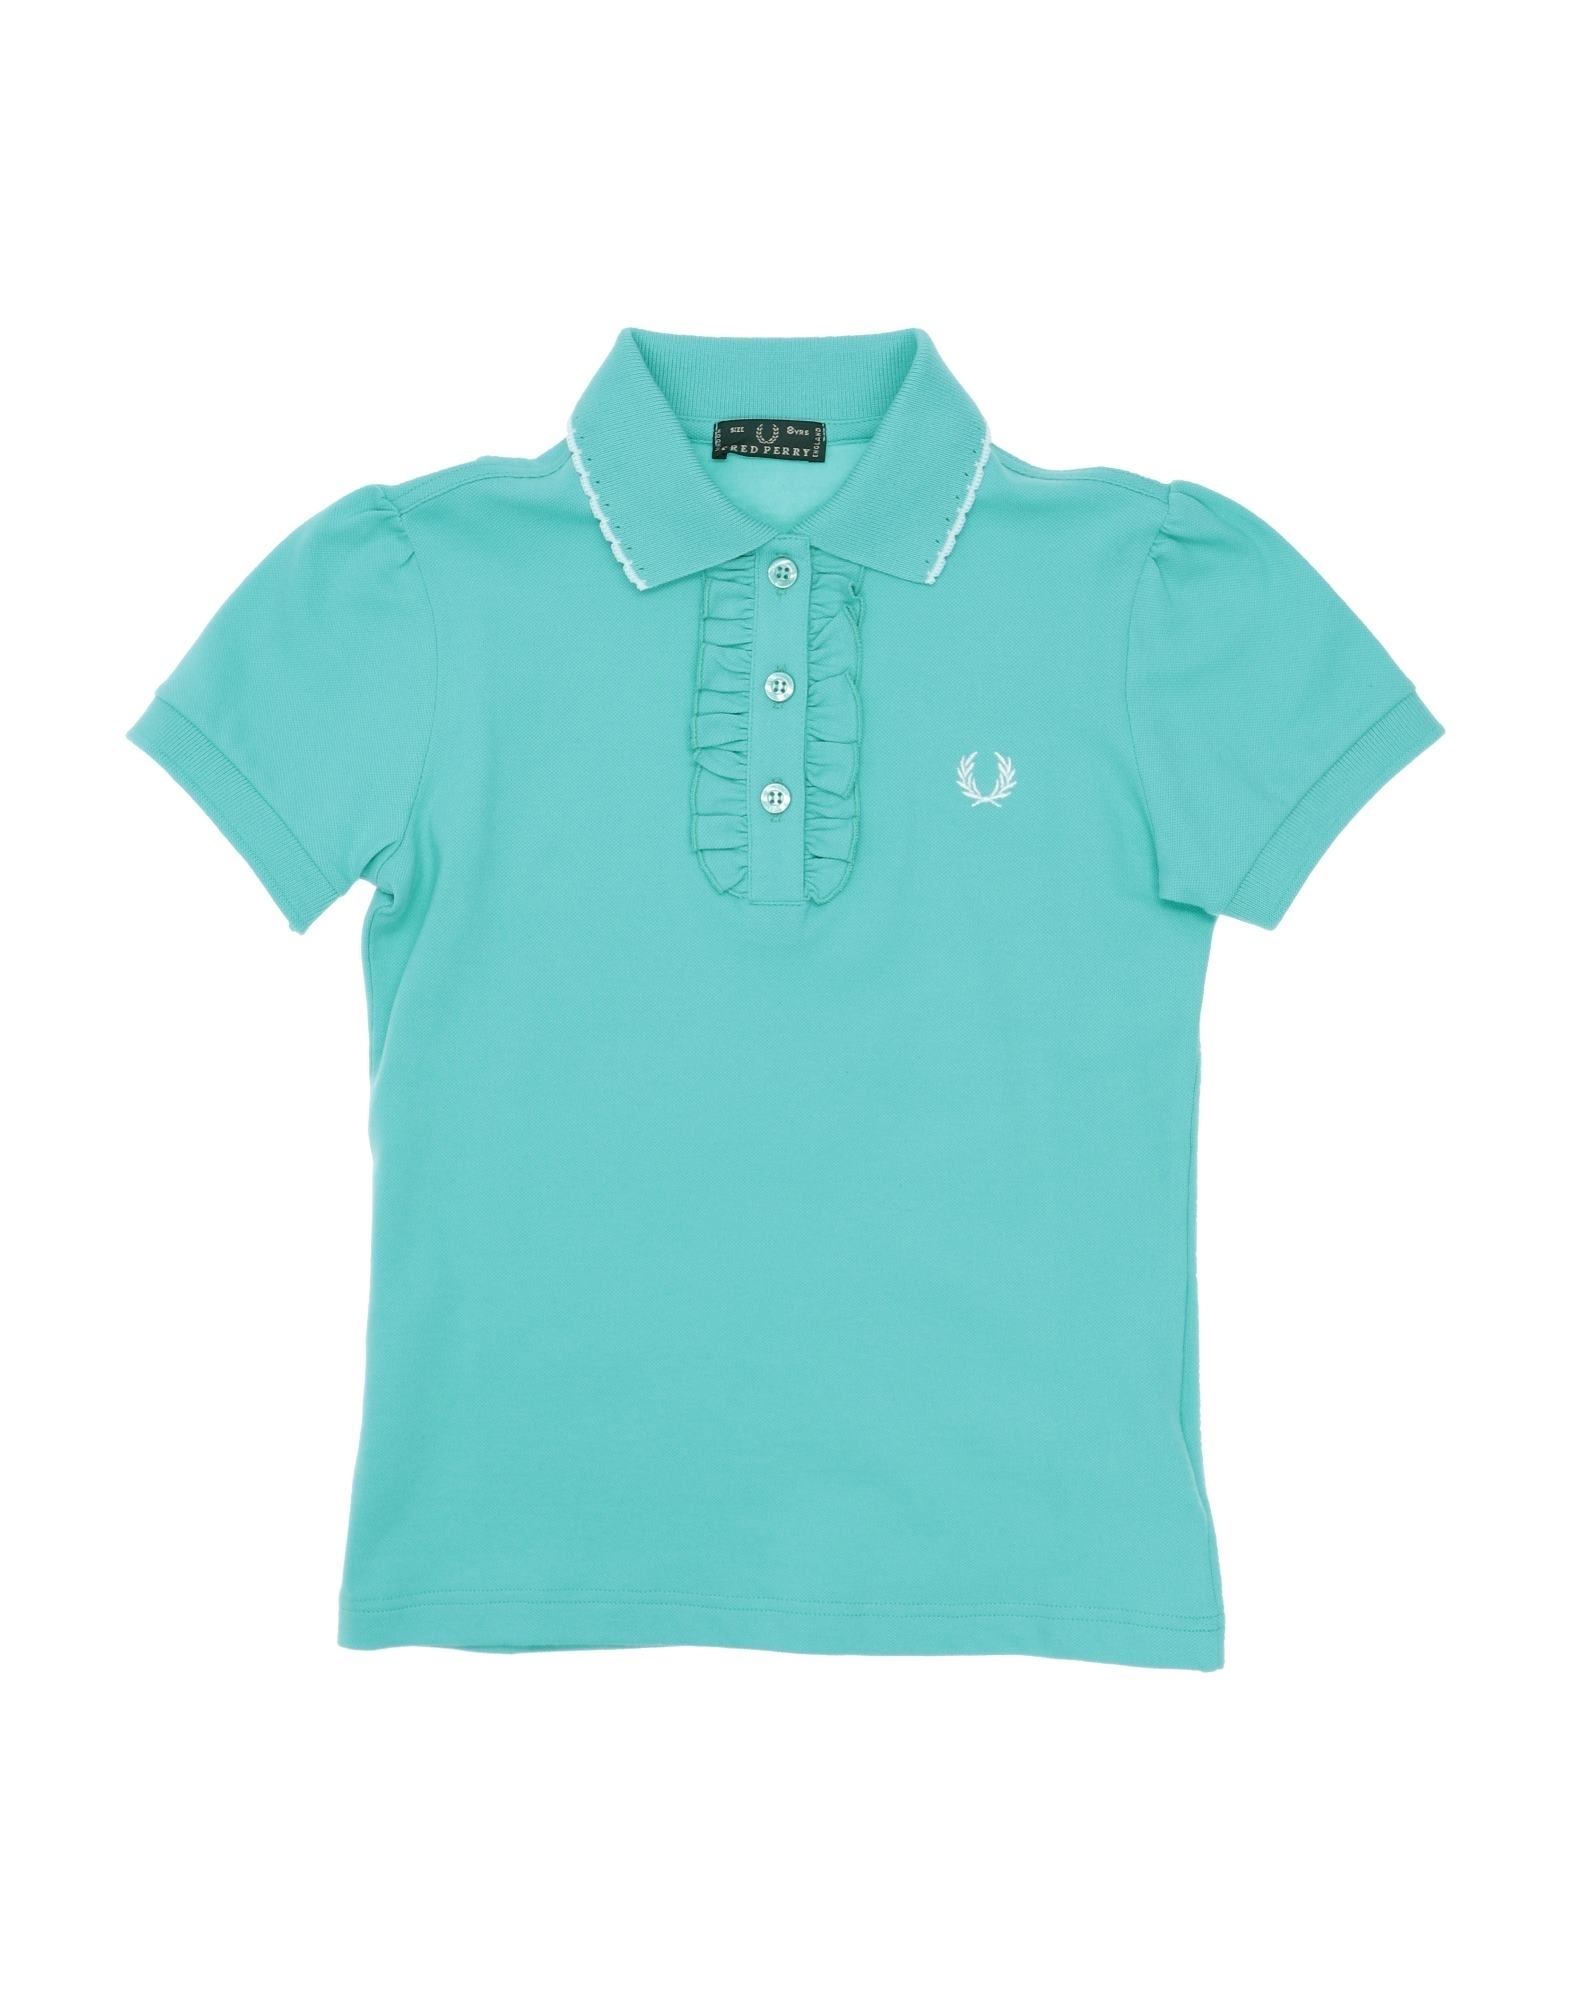 ＜YOOX＞ FRED PERRY ガールズ 3-8 歳 ポロシャツ ターコイズブルー 8 コットン 95% / ポリウレタン 5%画像